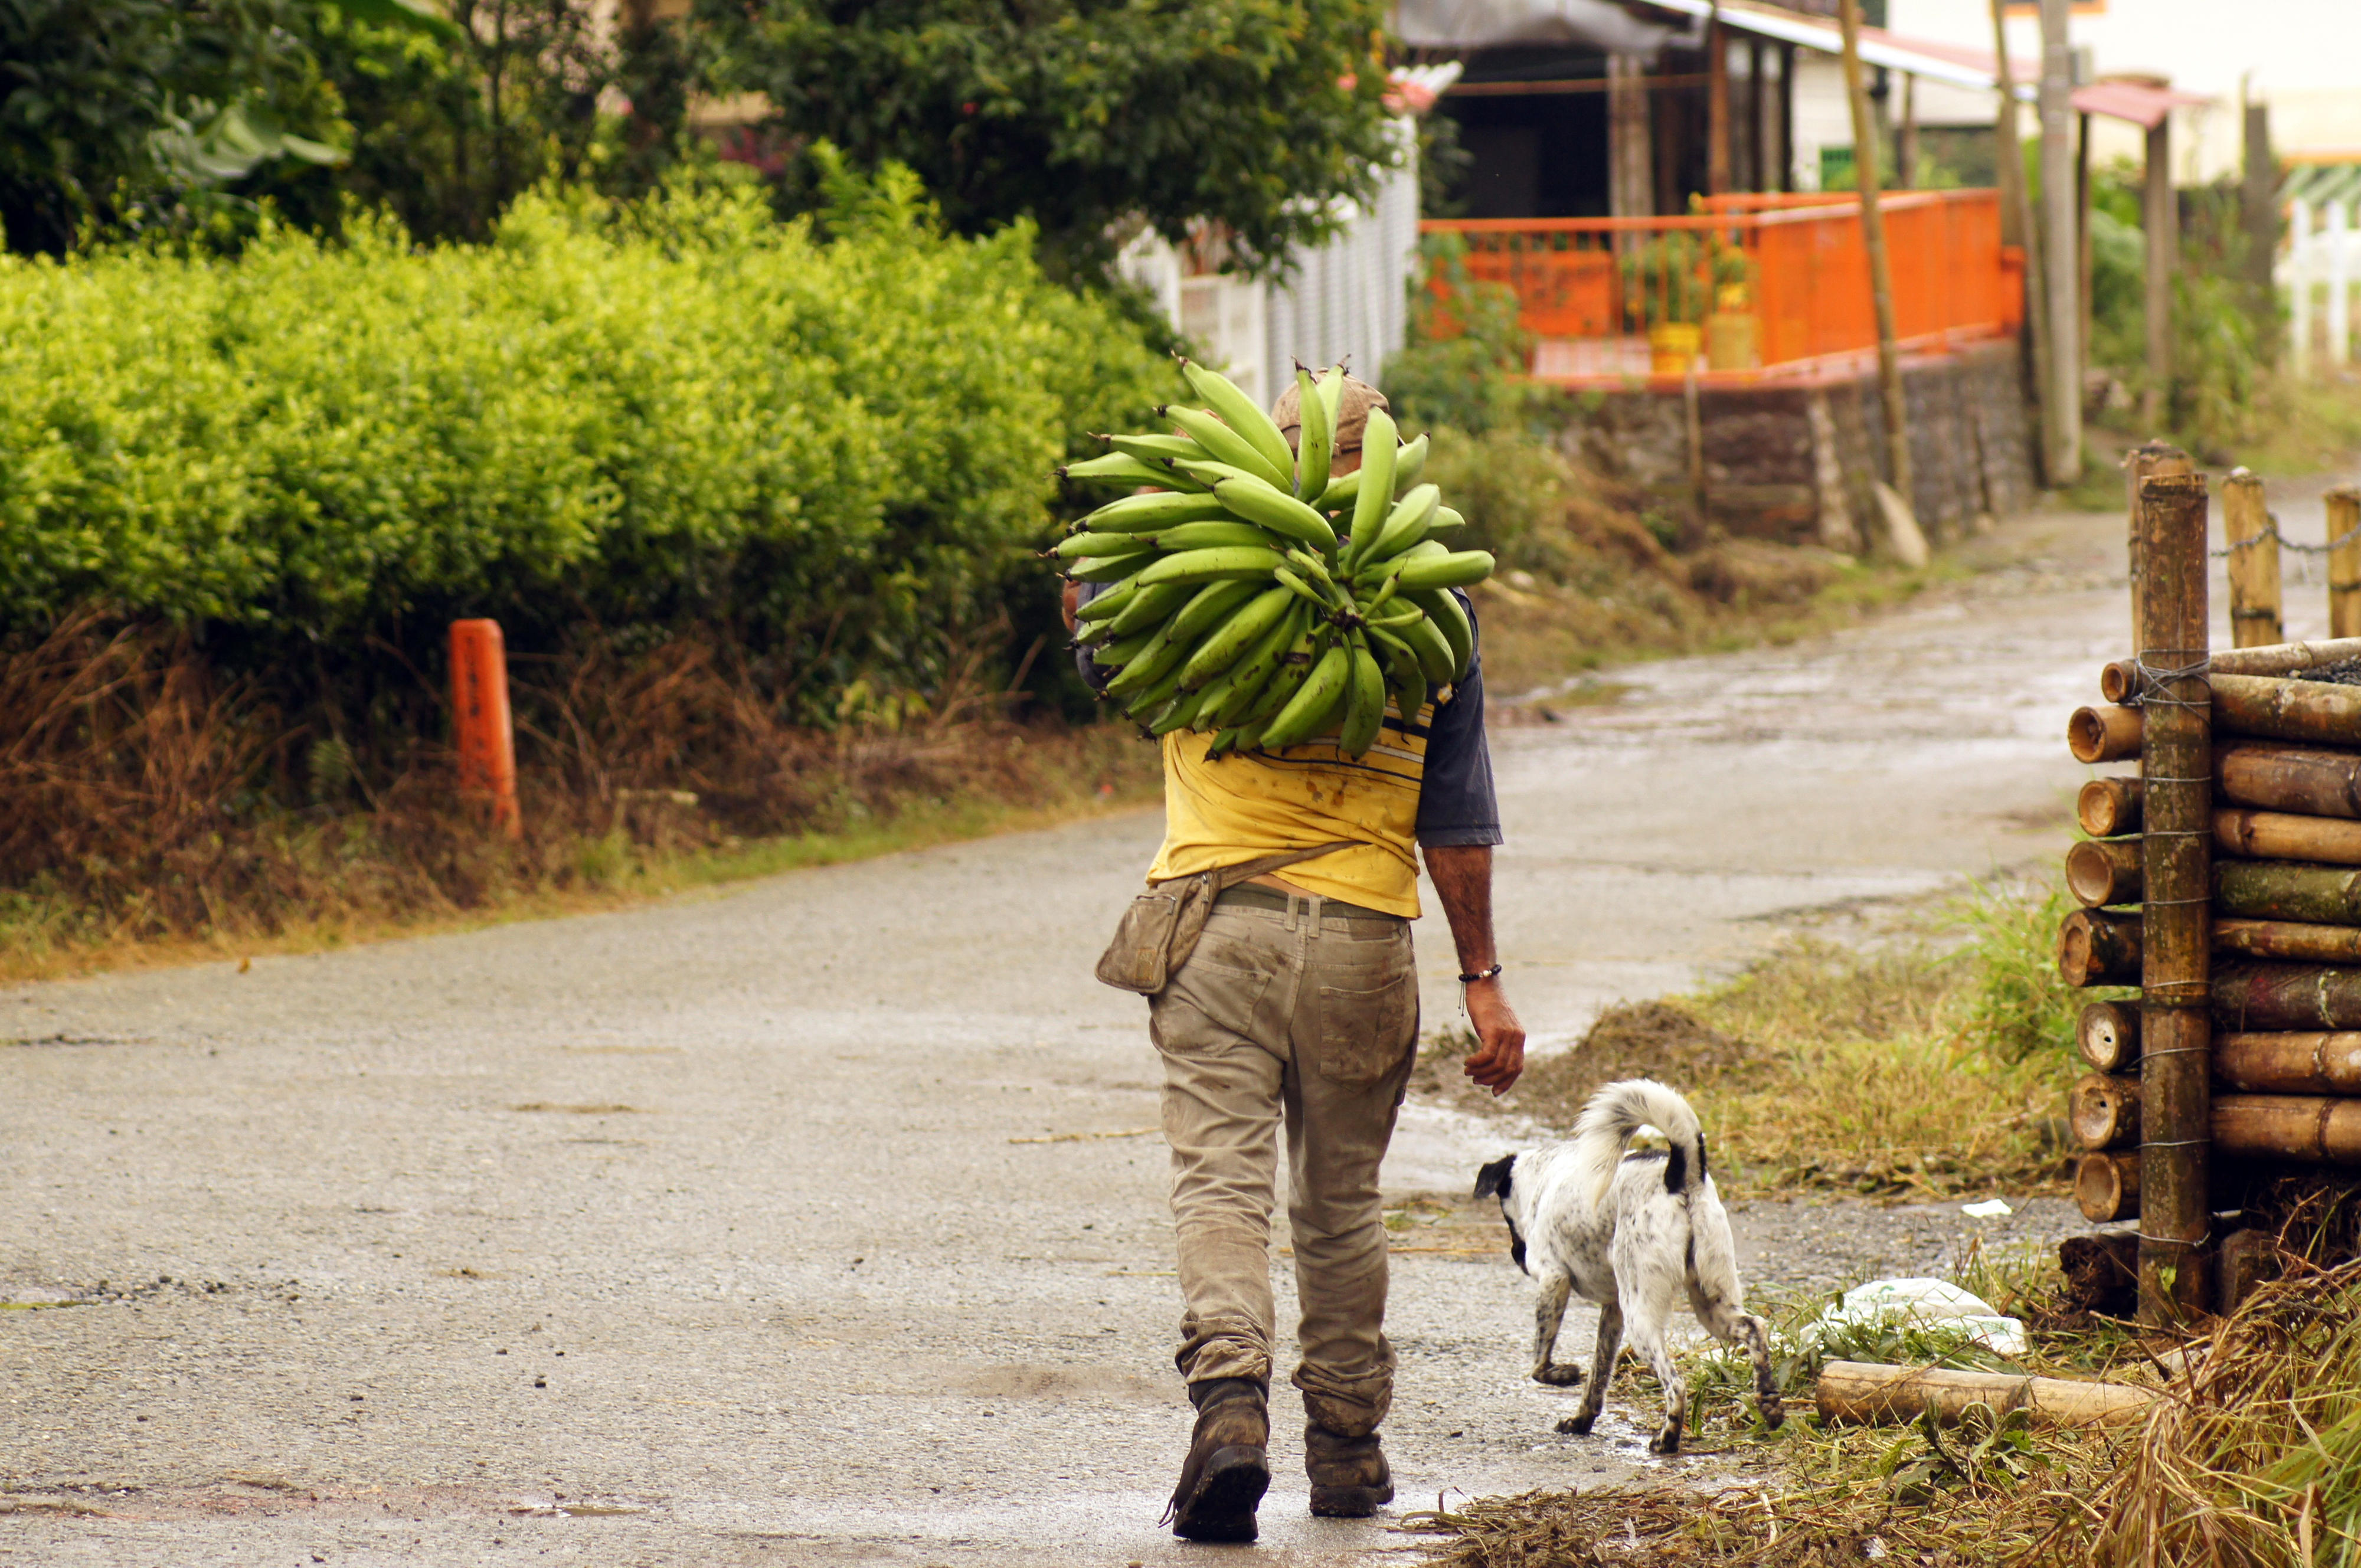 A farmer in Quindío province, Colombia